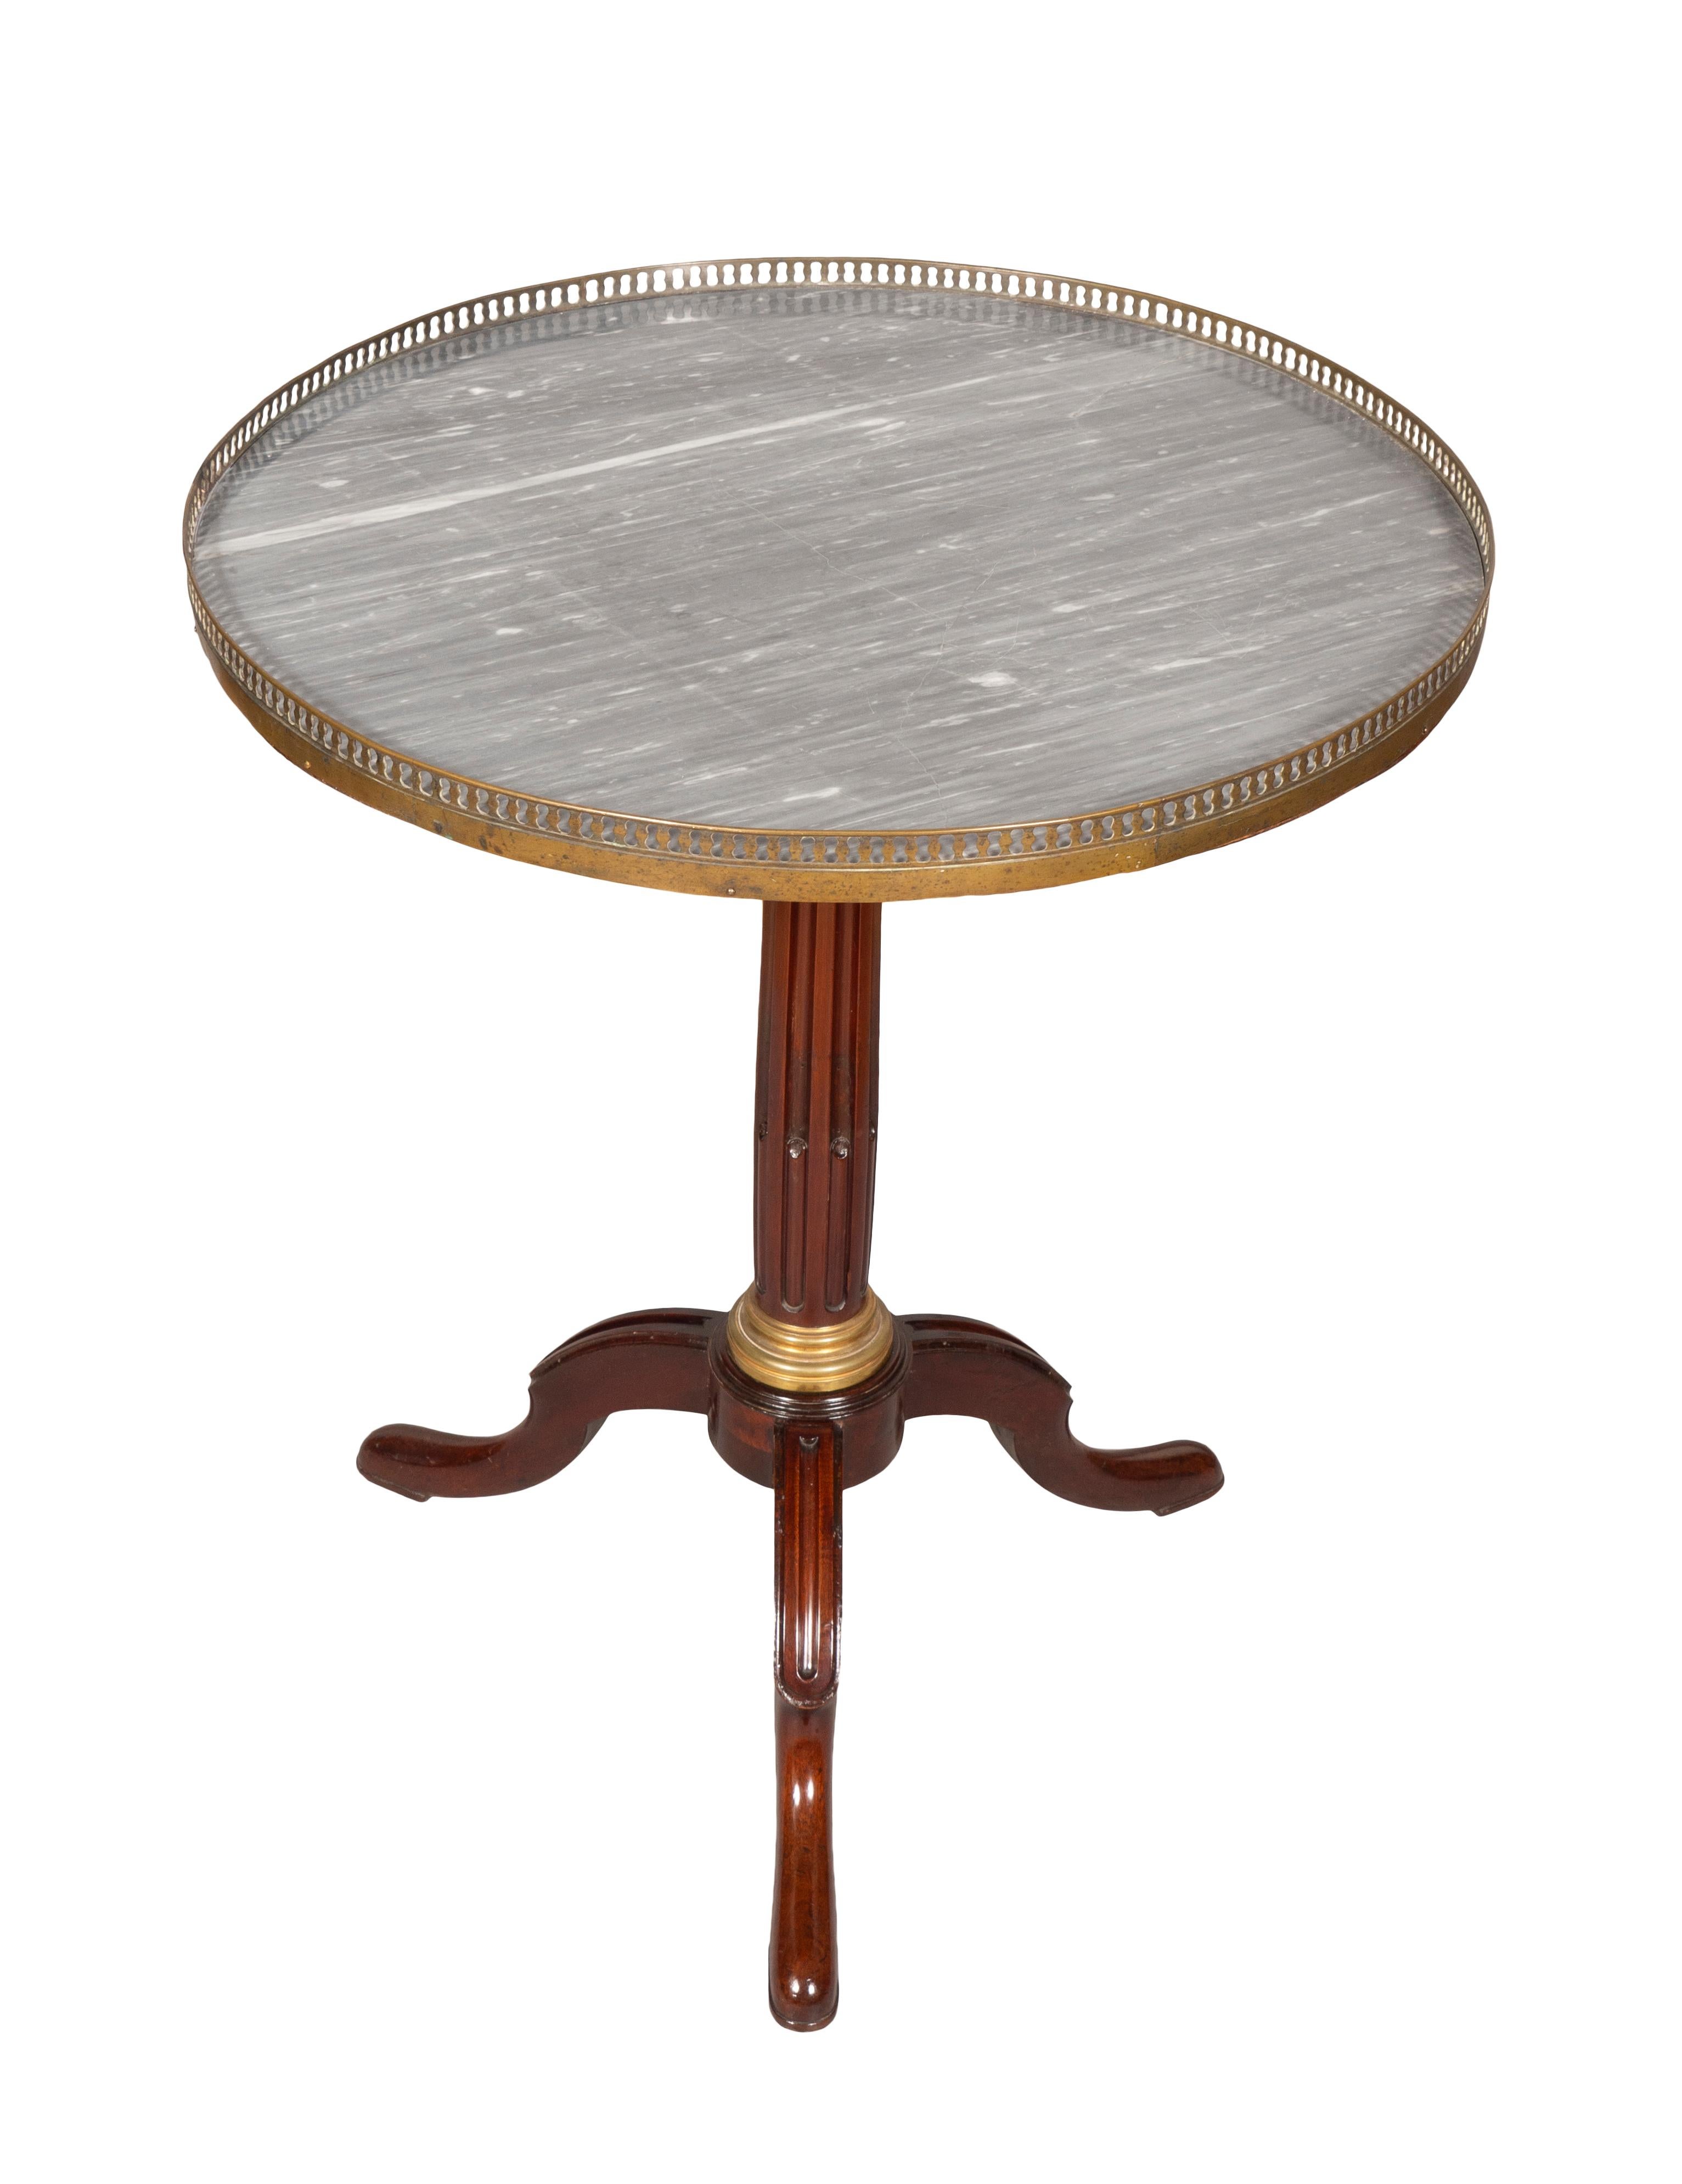 Circular hinged bleu turquin marble top with brass gallery with turned stop fluted support joining three legs.